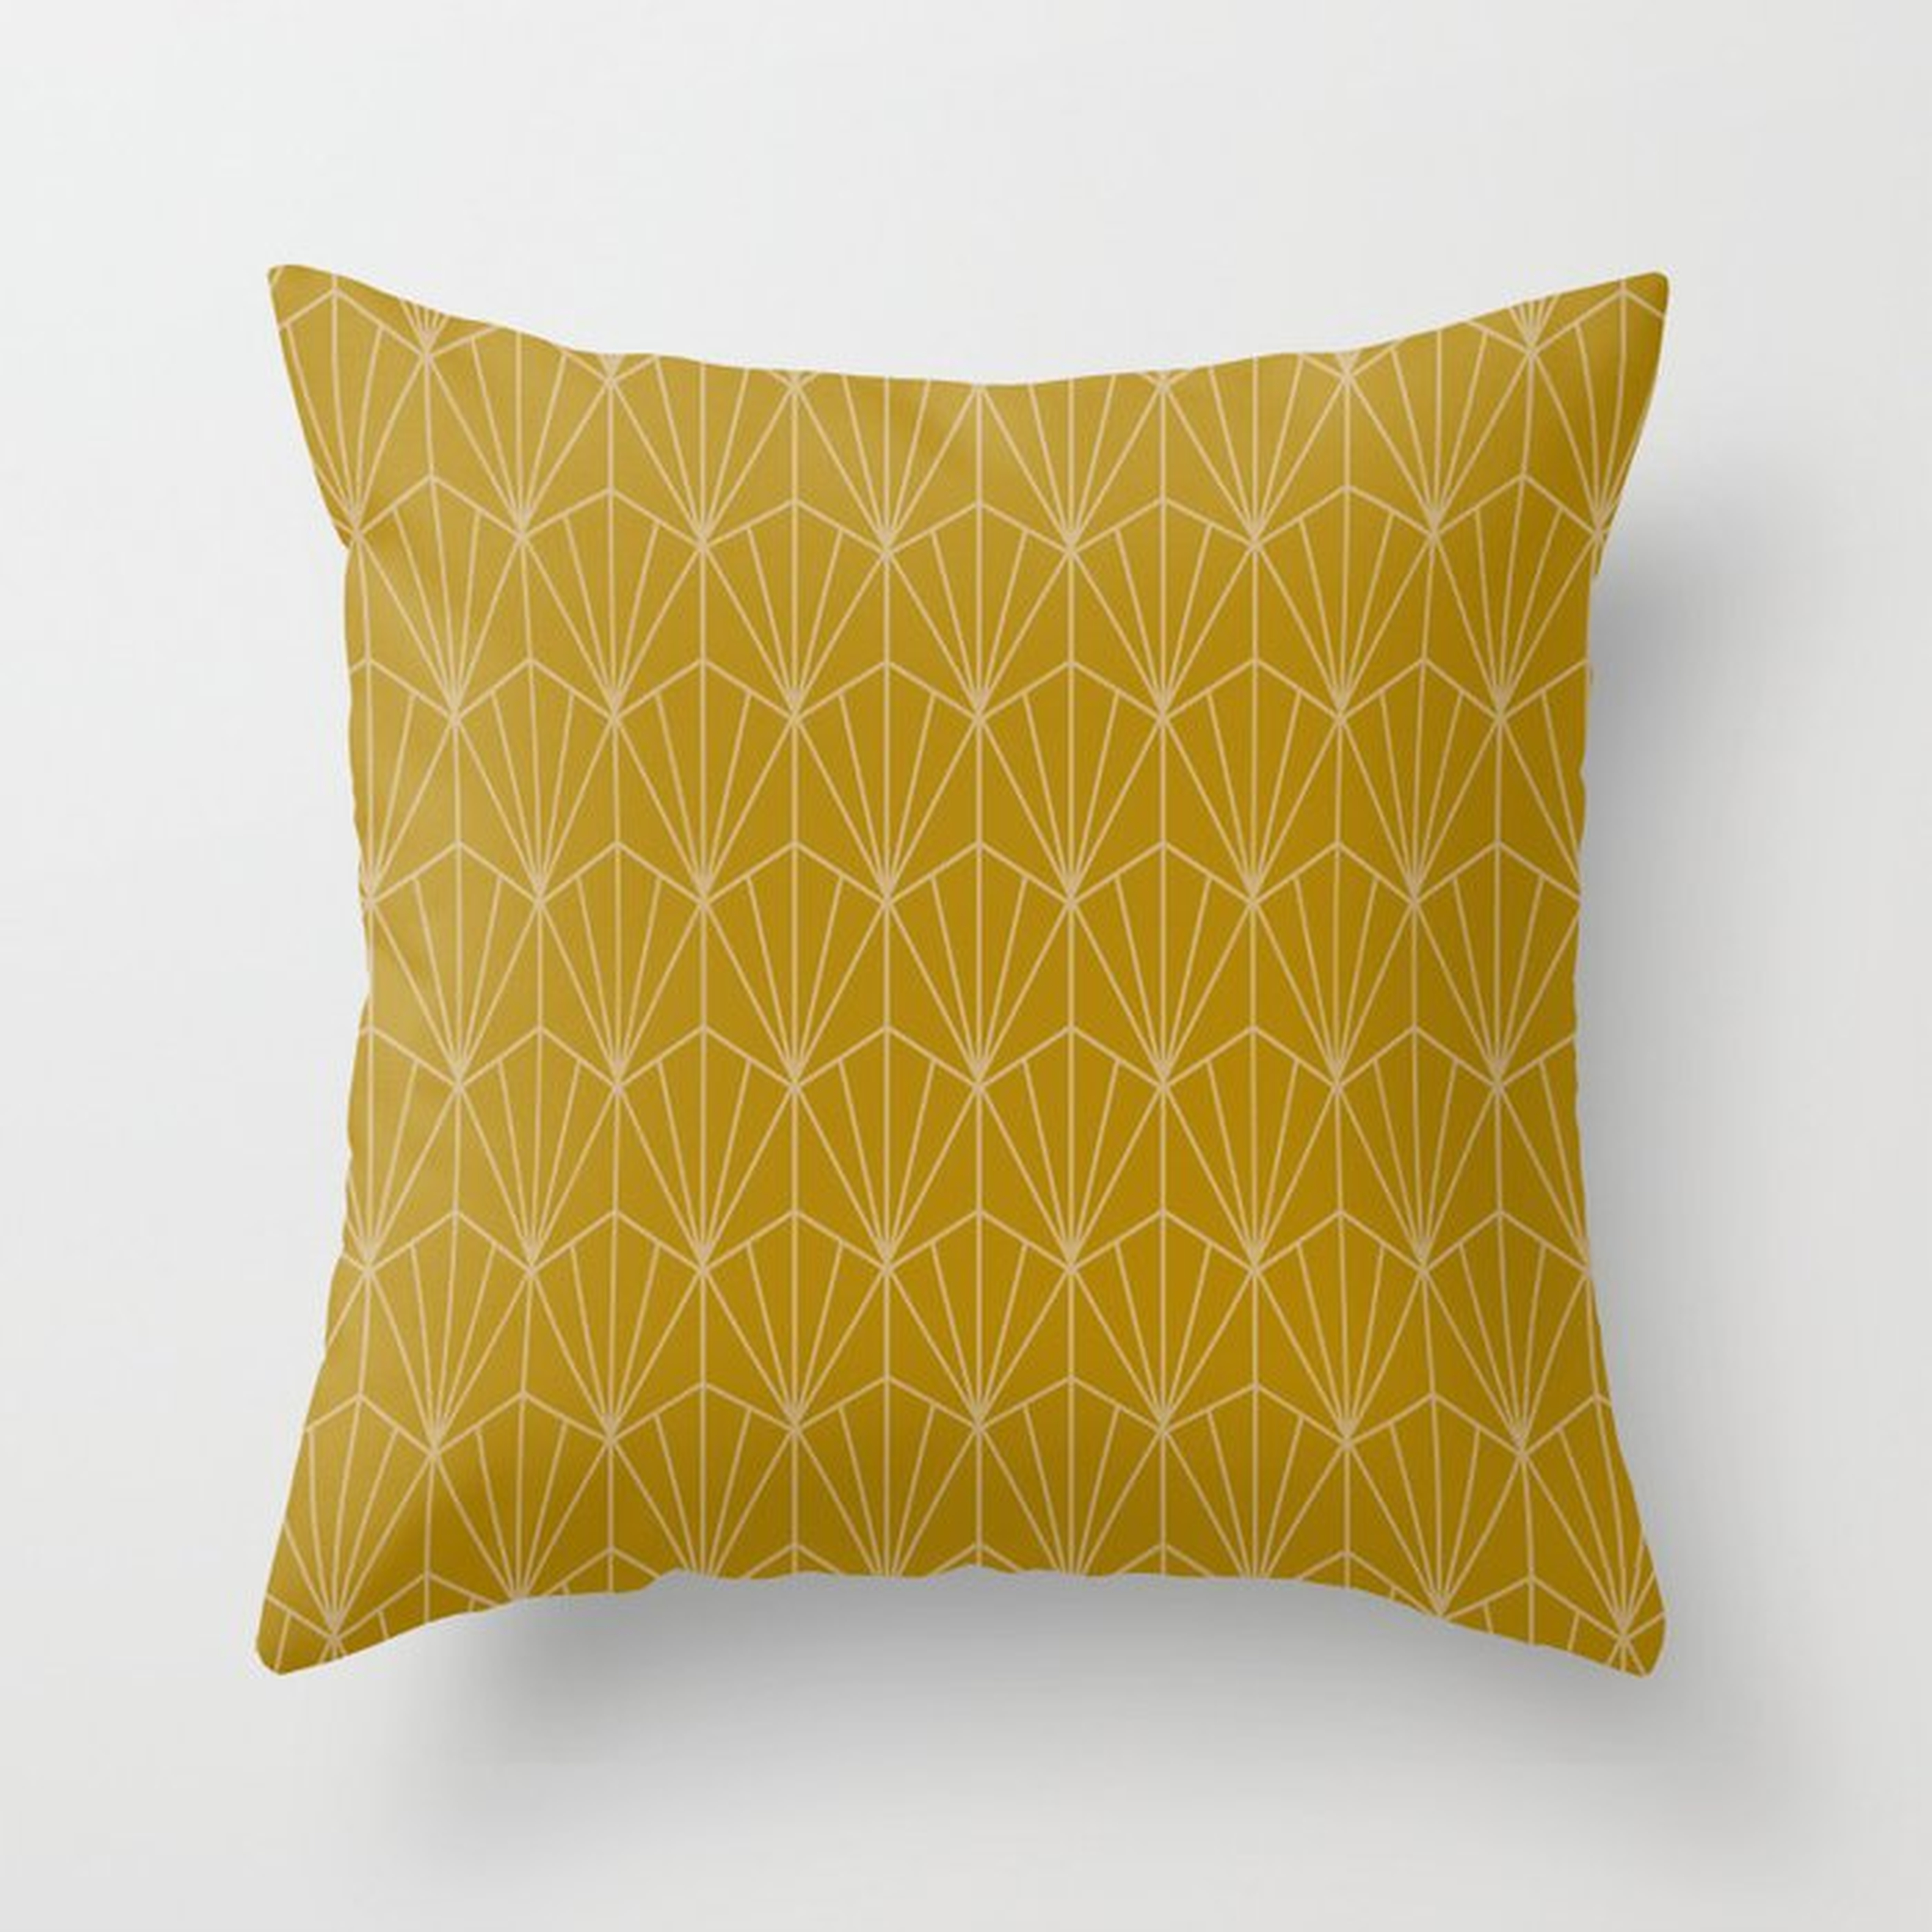 Art Deco Vector In Gold Throw Pillow by House Of Haha - Cover (20" x 20") With Pillow Insert - Outdoor Pillow - Society6